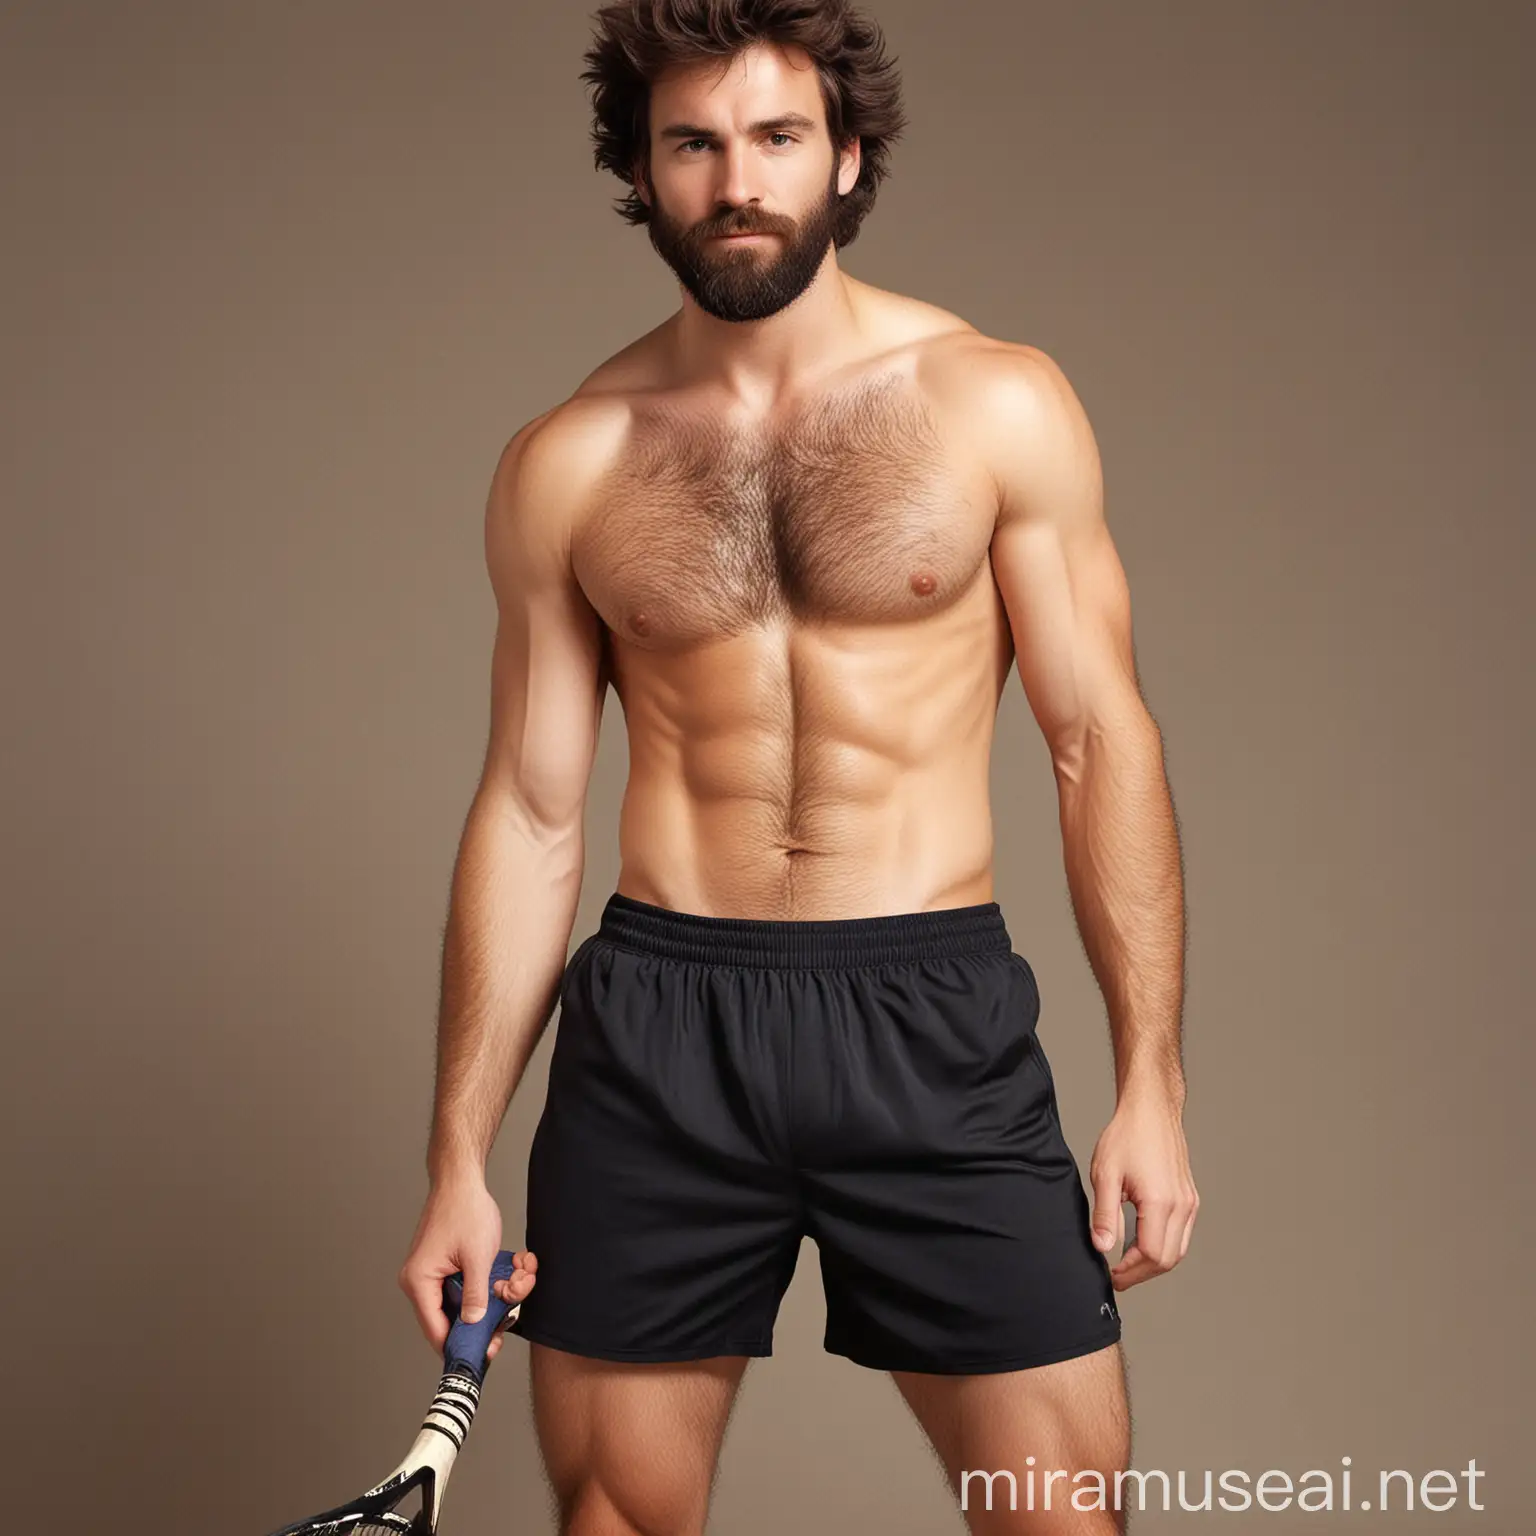 Athletic Man Playing Tennis in Retro 90s Style with Exposed Hairy Chest